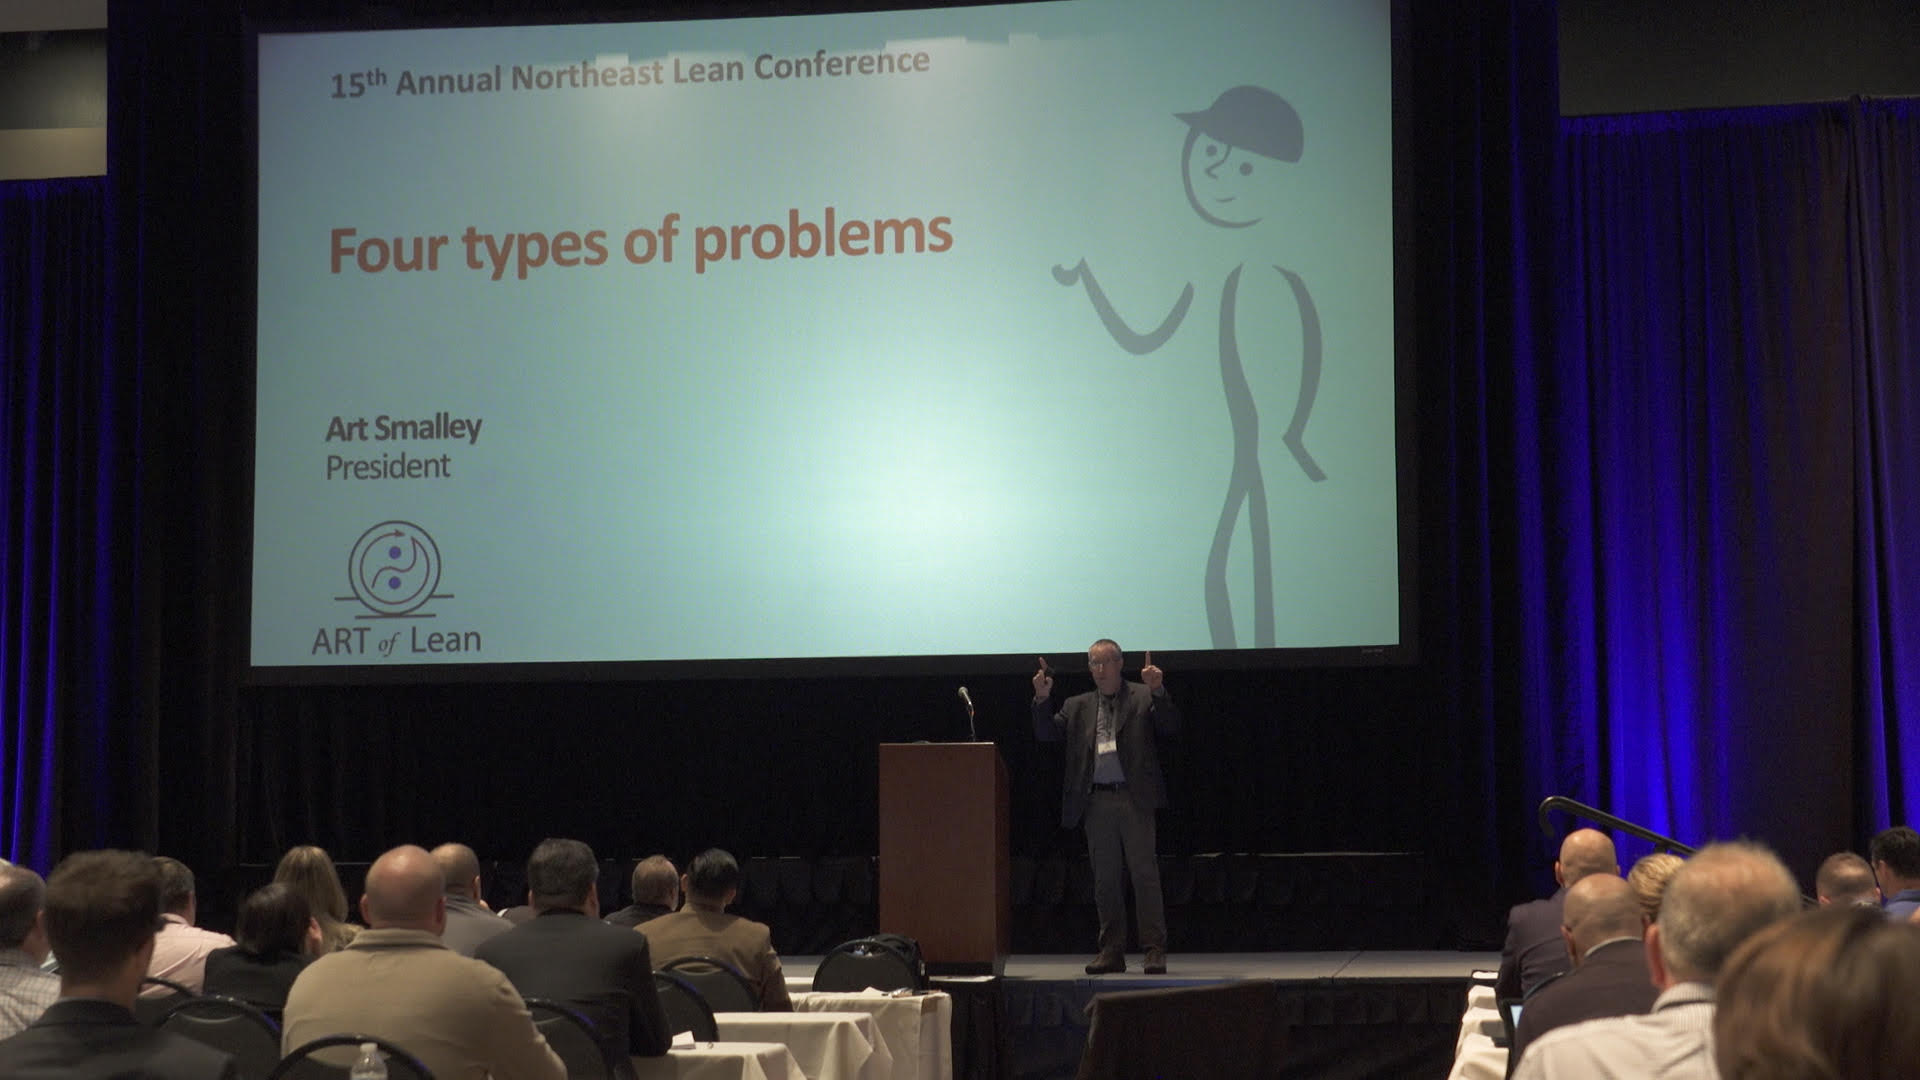 Art Smalley delivering a keynote on problem solving at the 2019 Northeast Lean Conference.